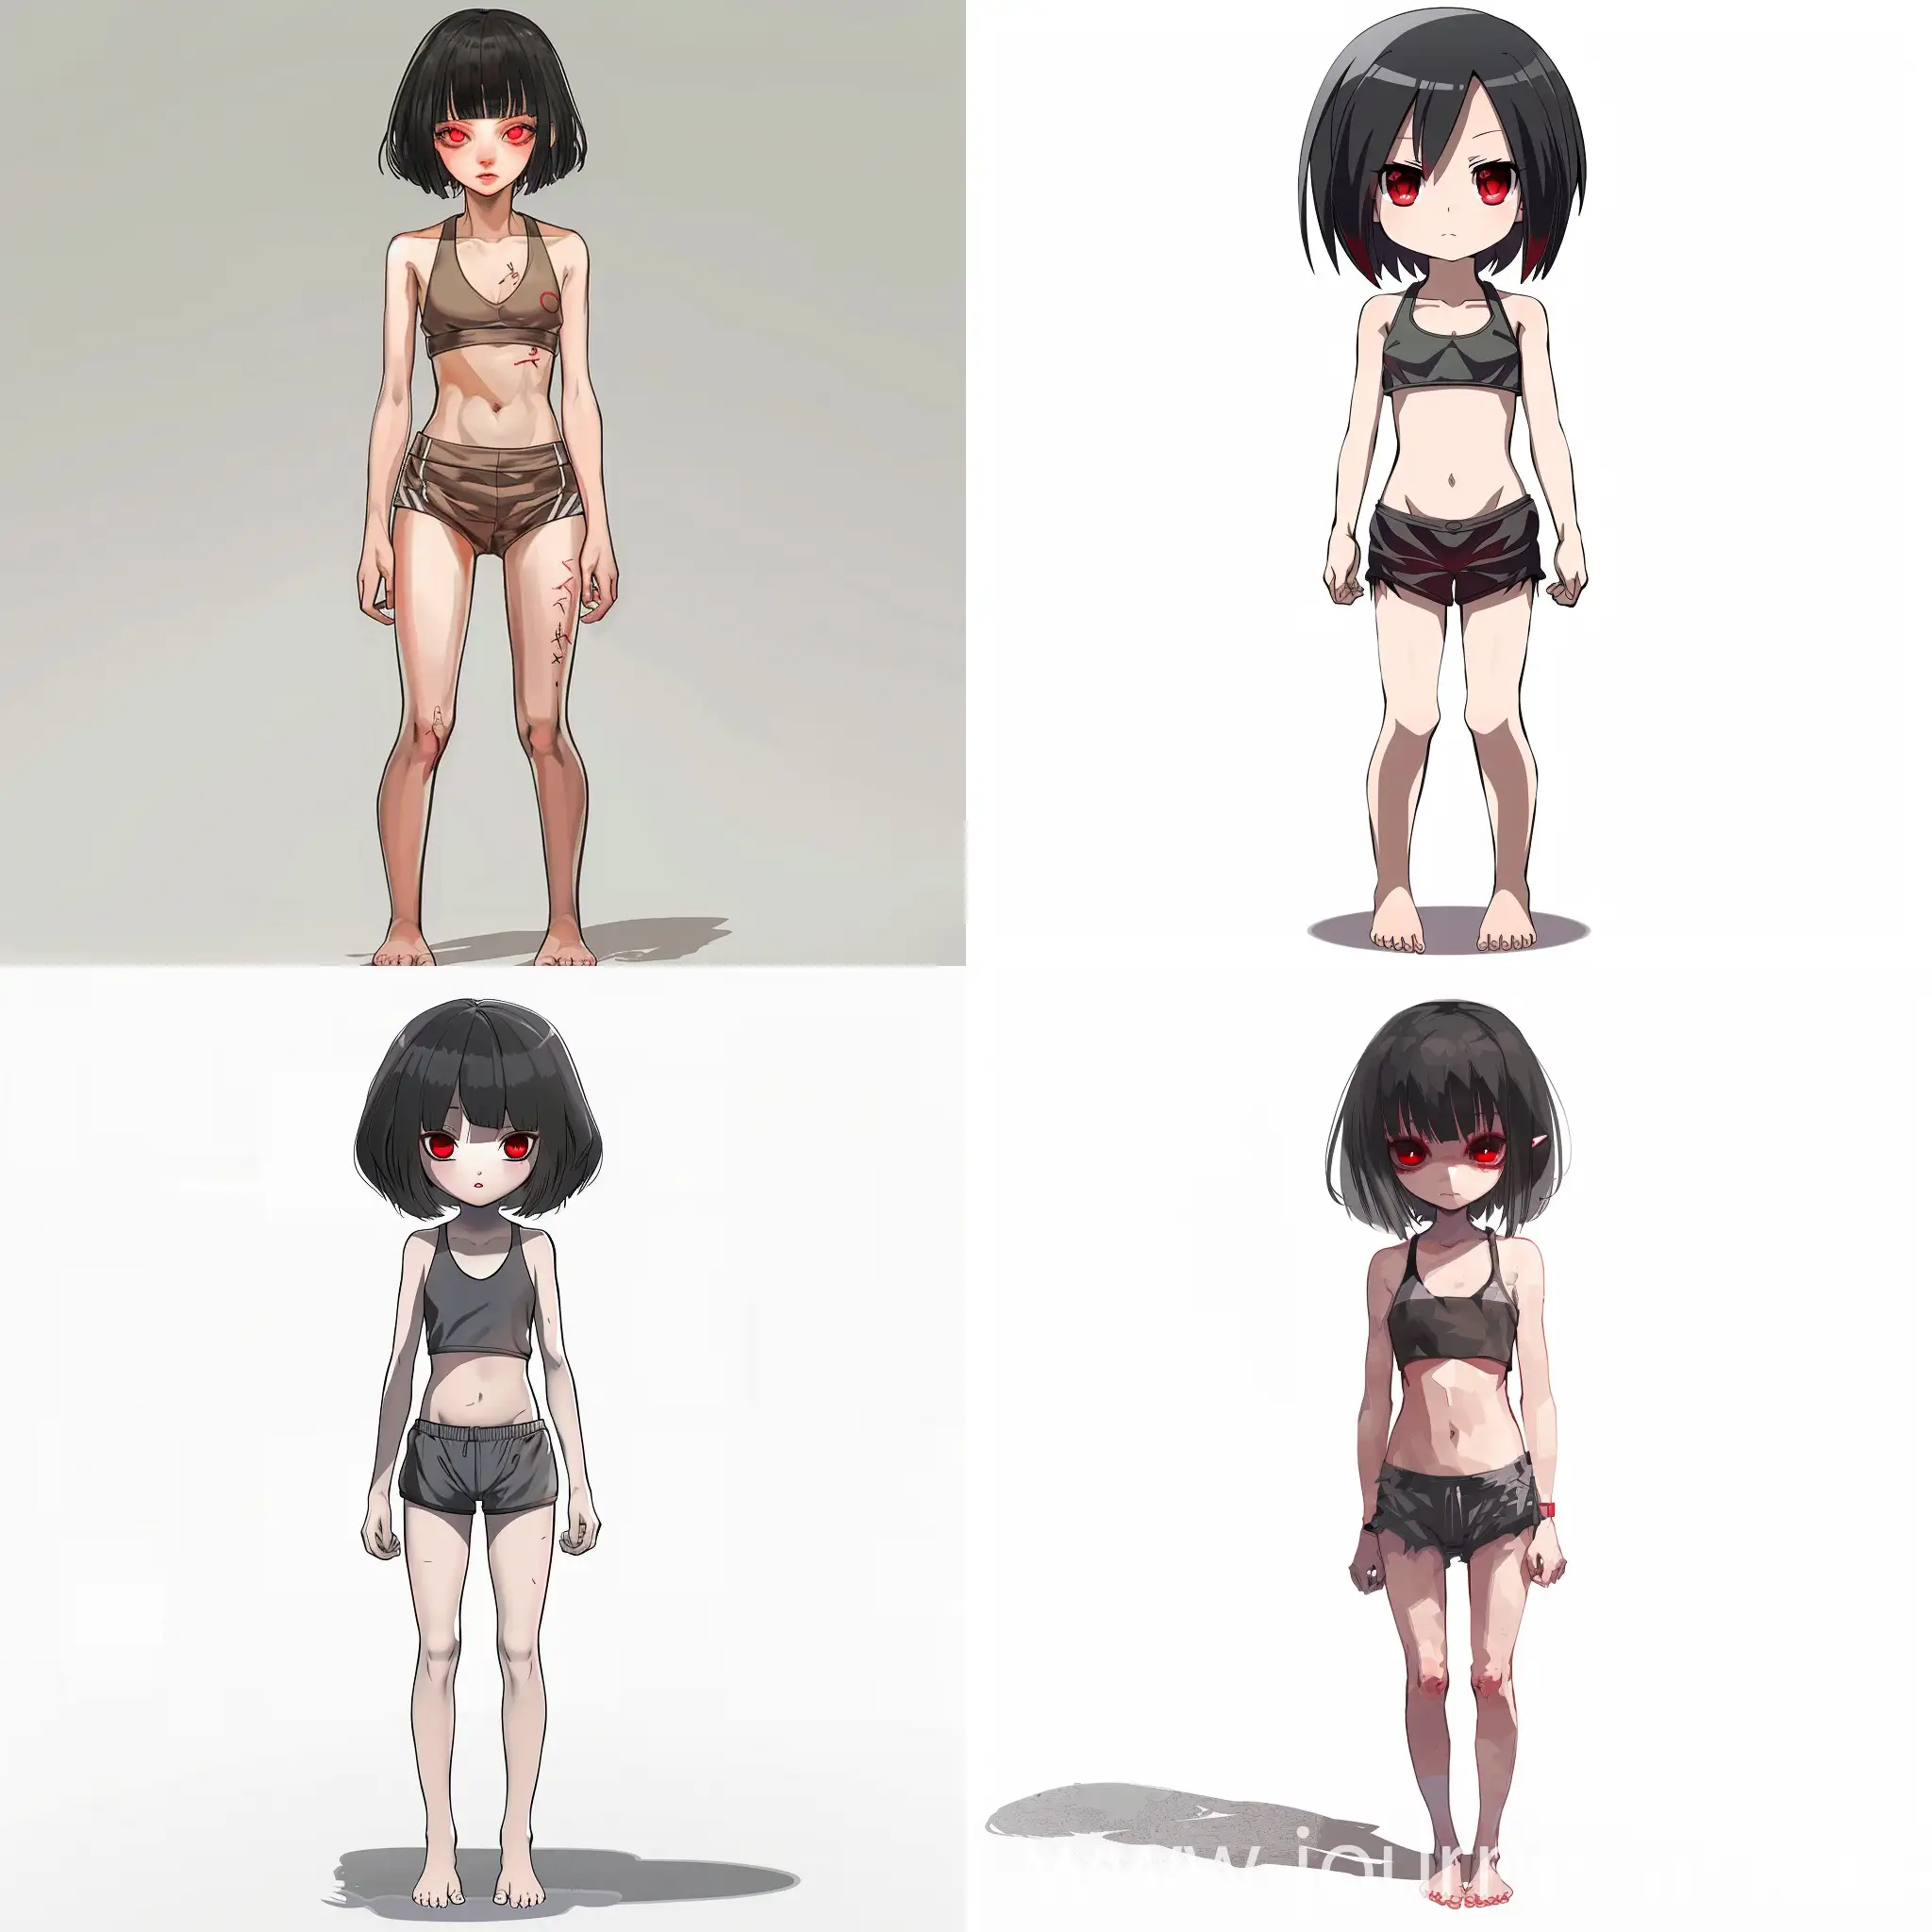 Anime-Style-Portrait-of-Petite-Girl-with-Bob-Haircut-Black-Hair-and-Red-Eyes